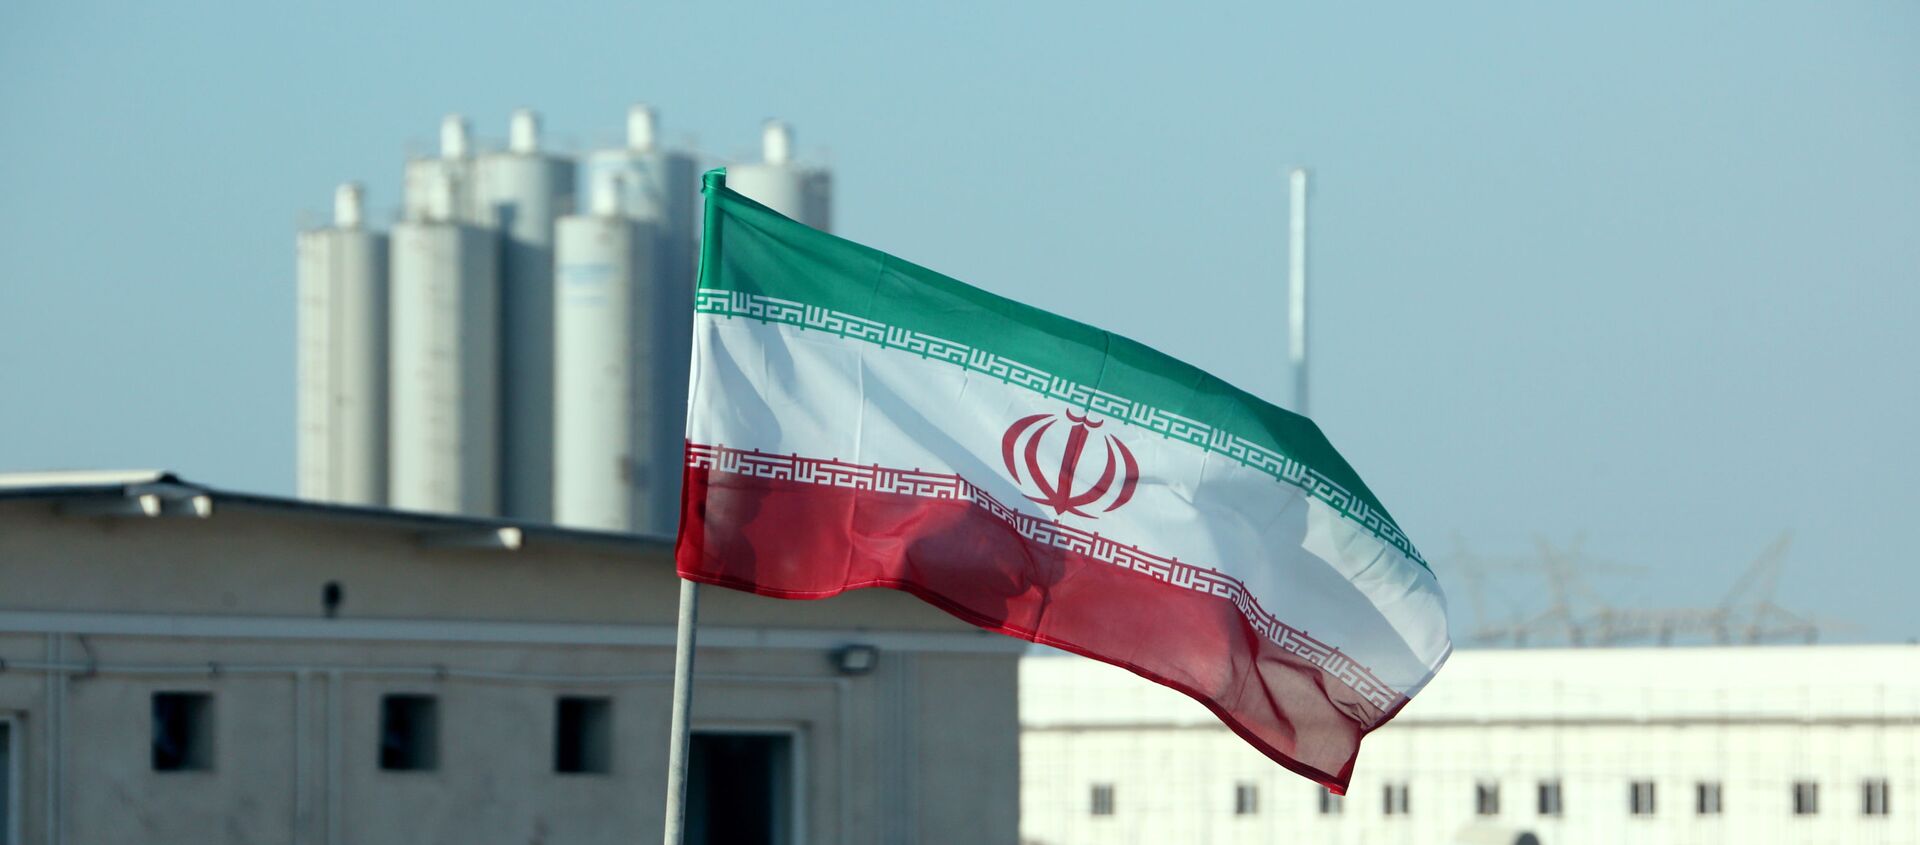 A picture taken on 10 November 2019, shows an Iranian flag at Iran's Bushehr nuclear power plant, during an official ceremony to kick-start works on a second reactor at the facility. Bushehr is Iran's only nuclear power station and is currently running on imported fuel from Russia that is closely monitored by the UN's International Atomic Energy Agency. - Sputnik International, 1920, 15.02.2021